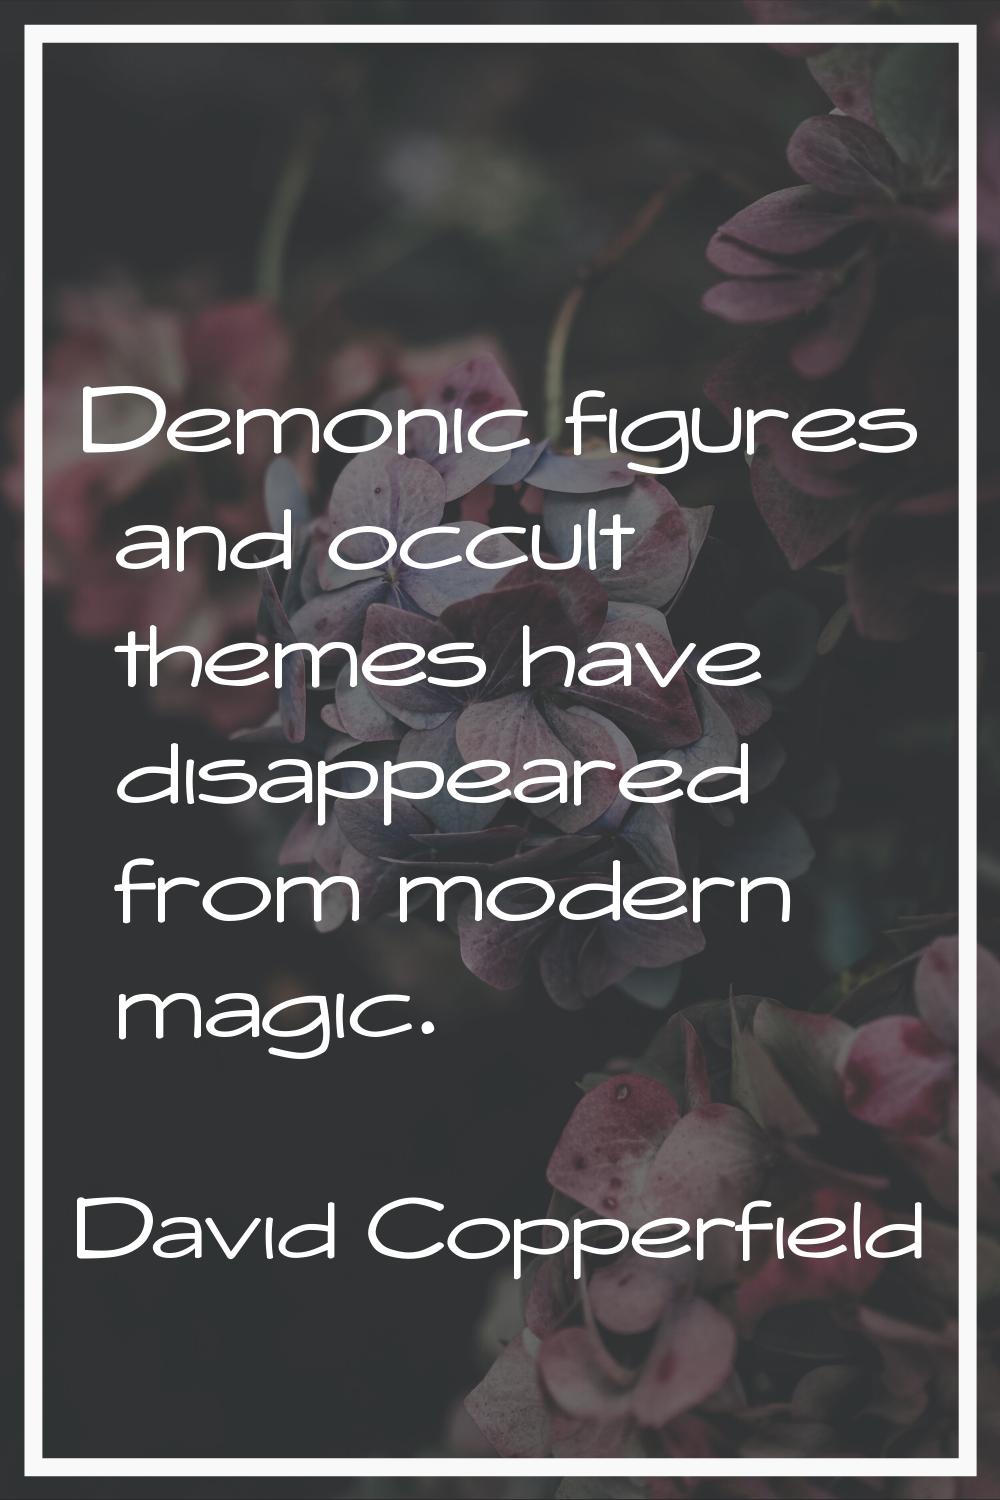 Demonic figures and occult themes have disappeared from modern magic.